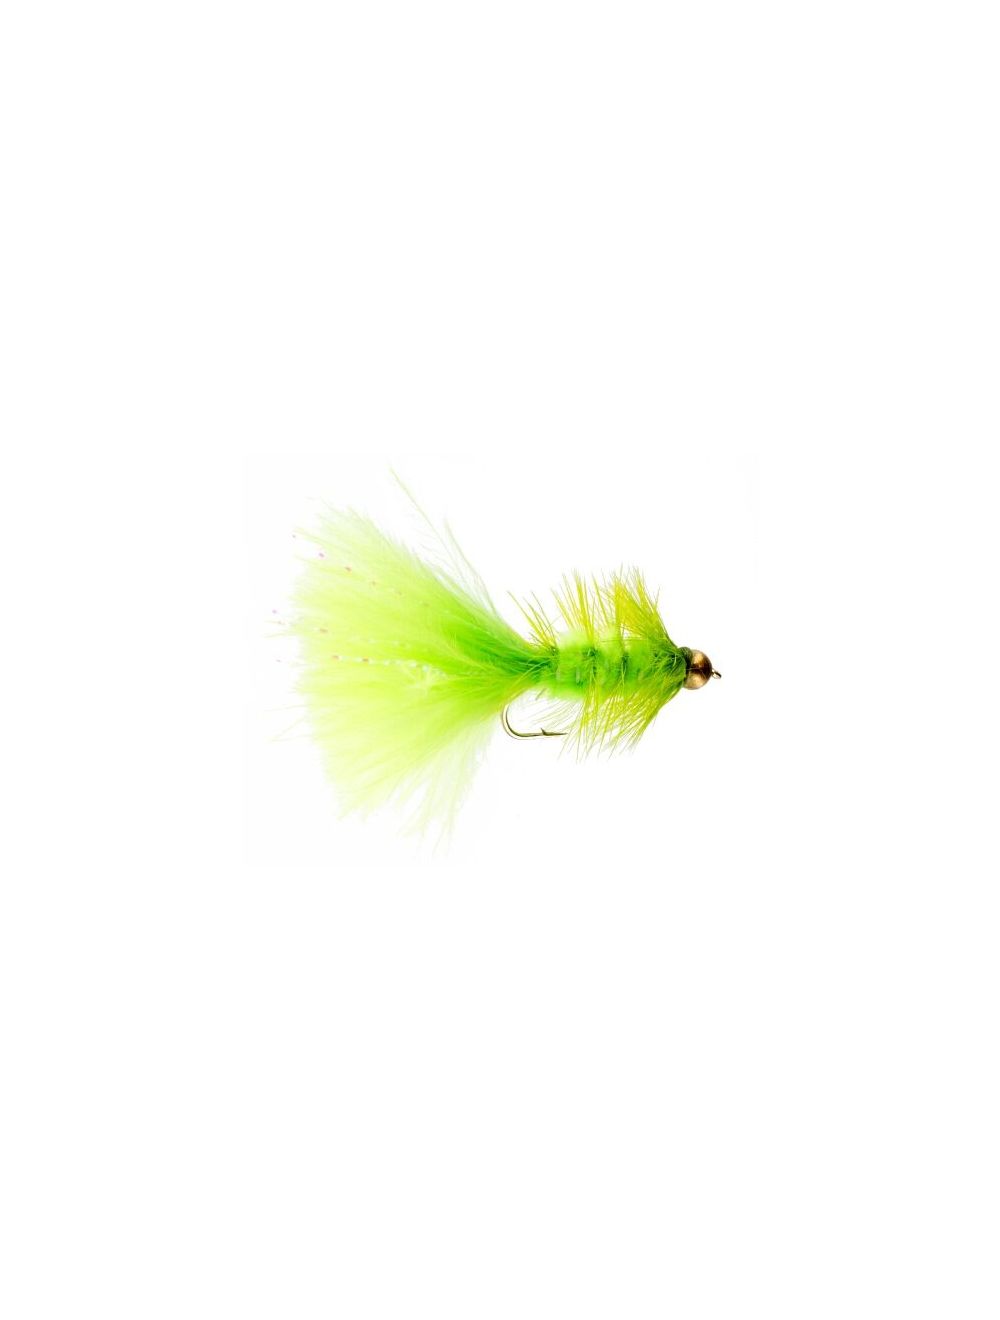 Details about   Fly Fishing Flies Bug Eyed Bugger Chartreuse Bass, Trout, Salmon x 6